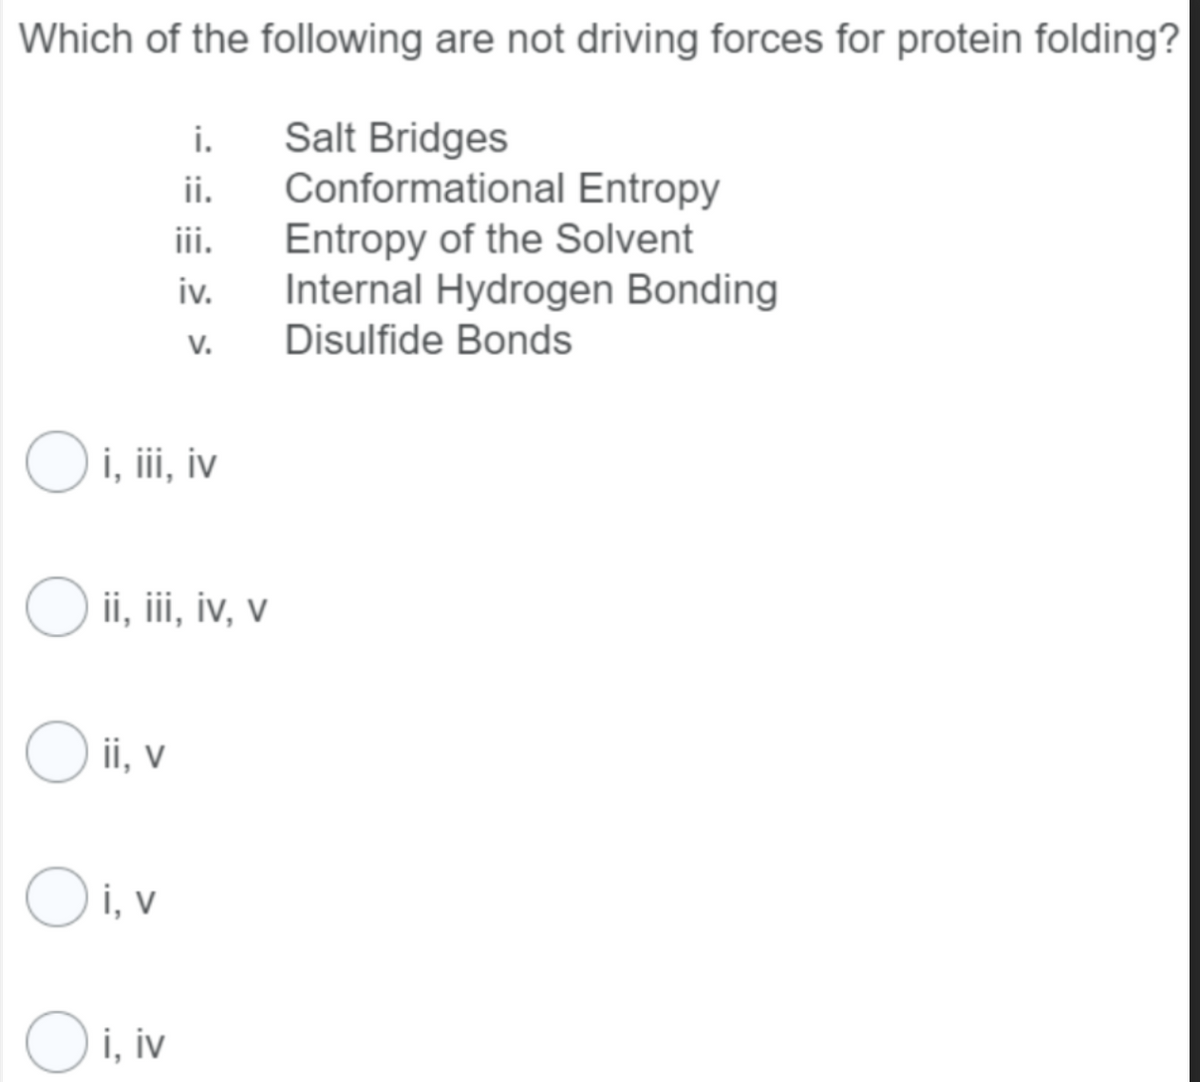 Which of the following are not driving forces for protein folding?
Salt Bridges
Conformational Entropy
Entropy of the Solvent
Internal Hydrogen Bonding
Disulfide Bonds
i.
ii.
iii.
iv.
V.
O i, iii, iv
O ii, iii, iv, v
Oii, v
Oi, v
Oi, iv